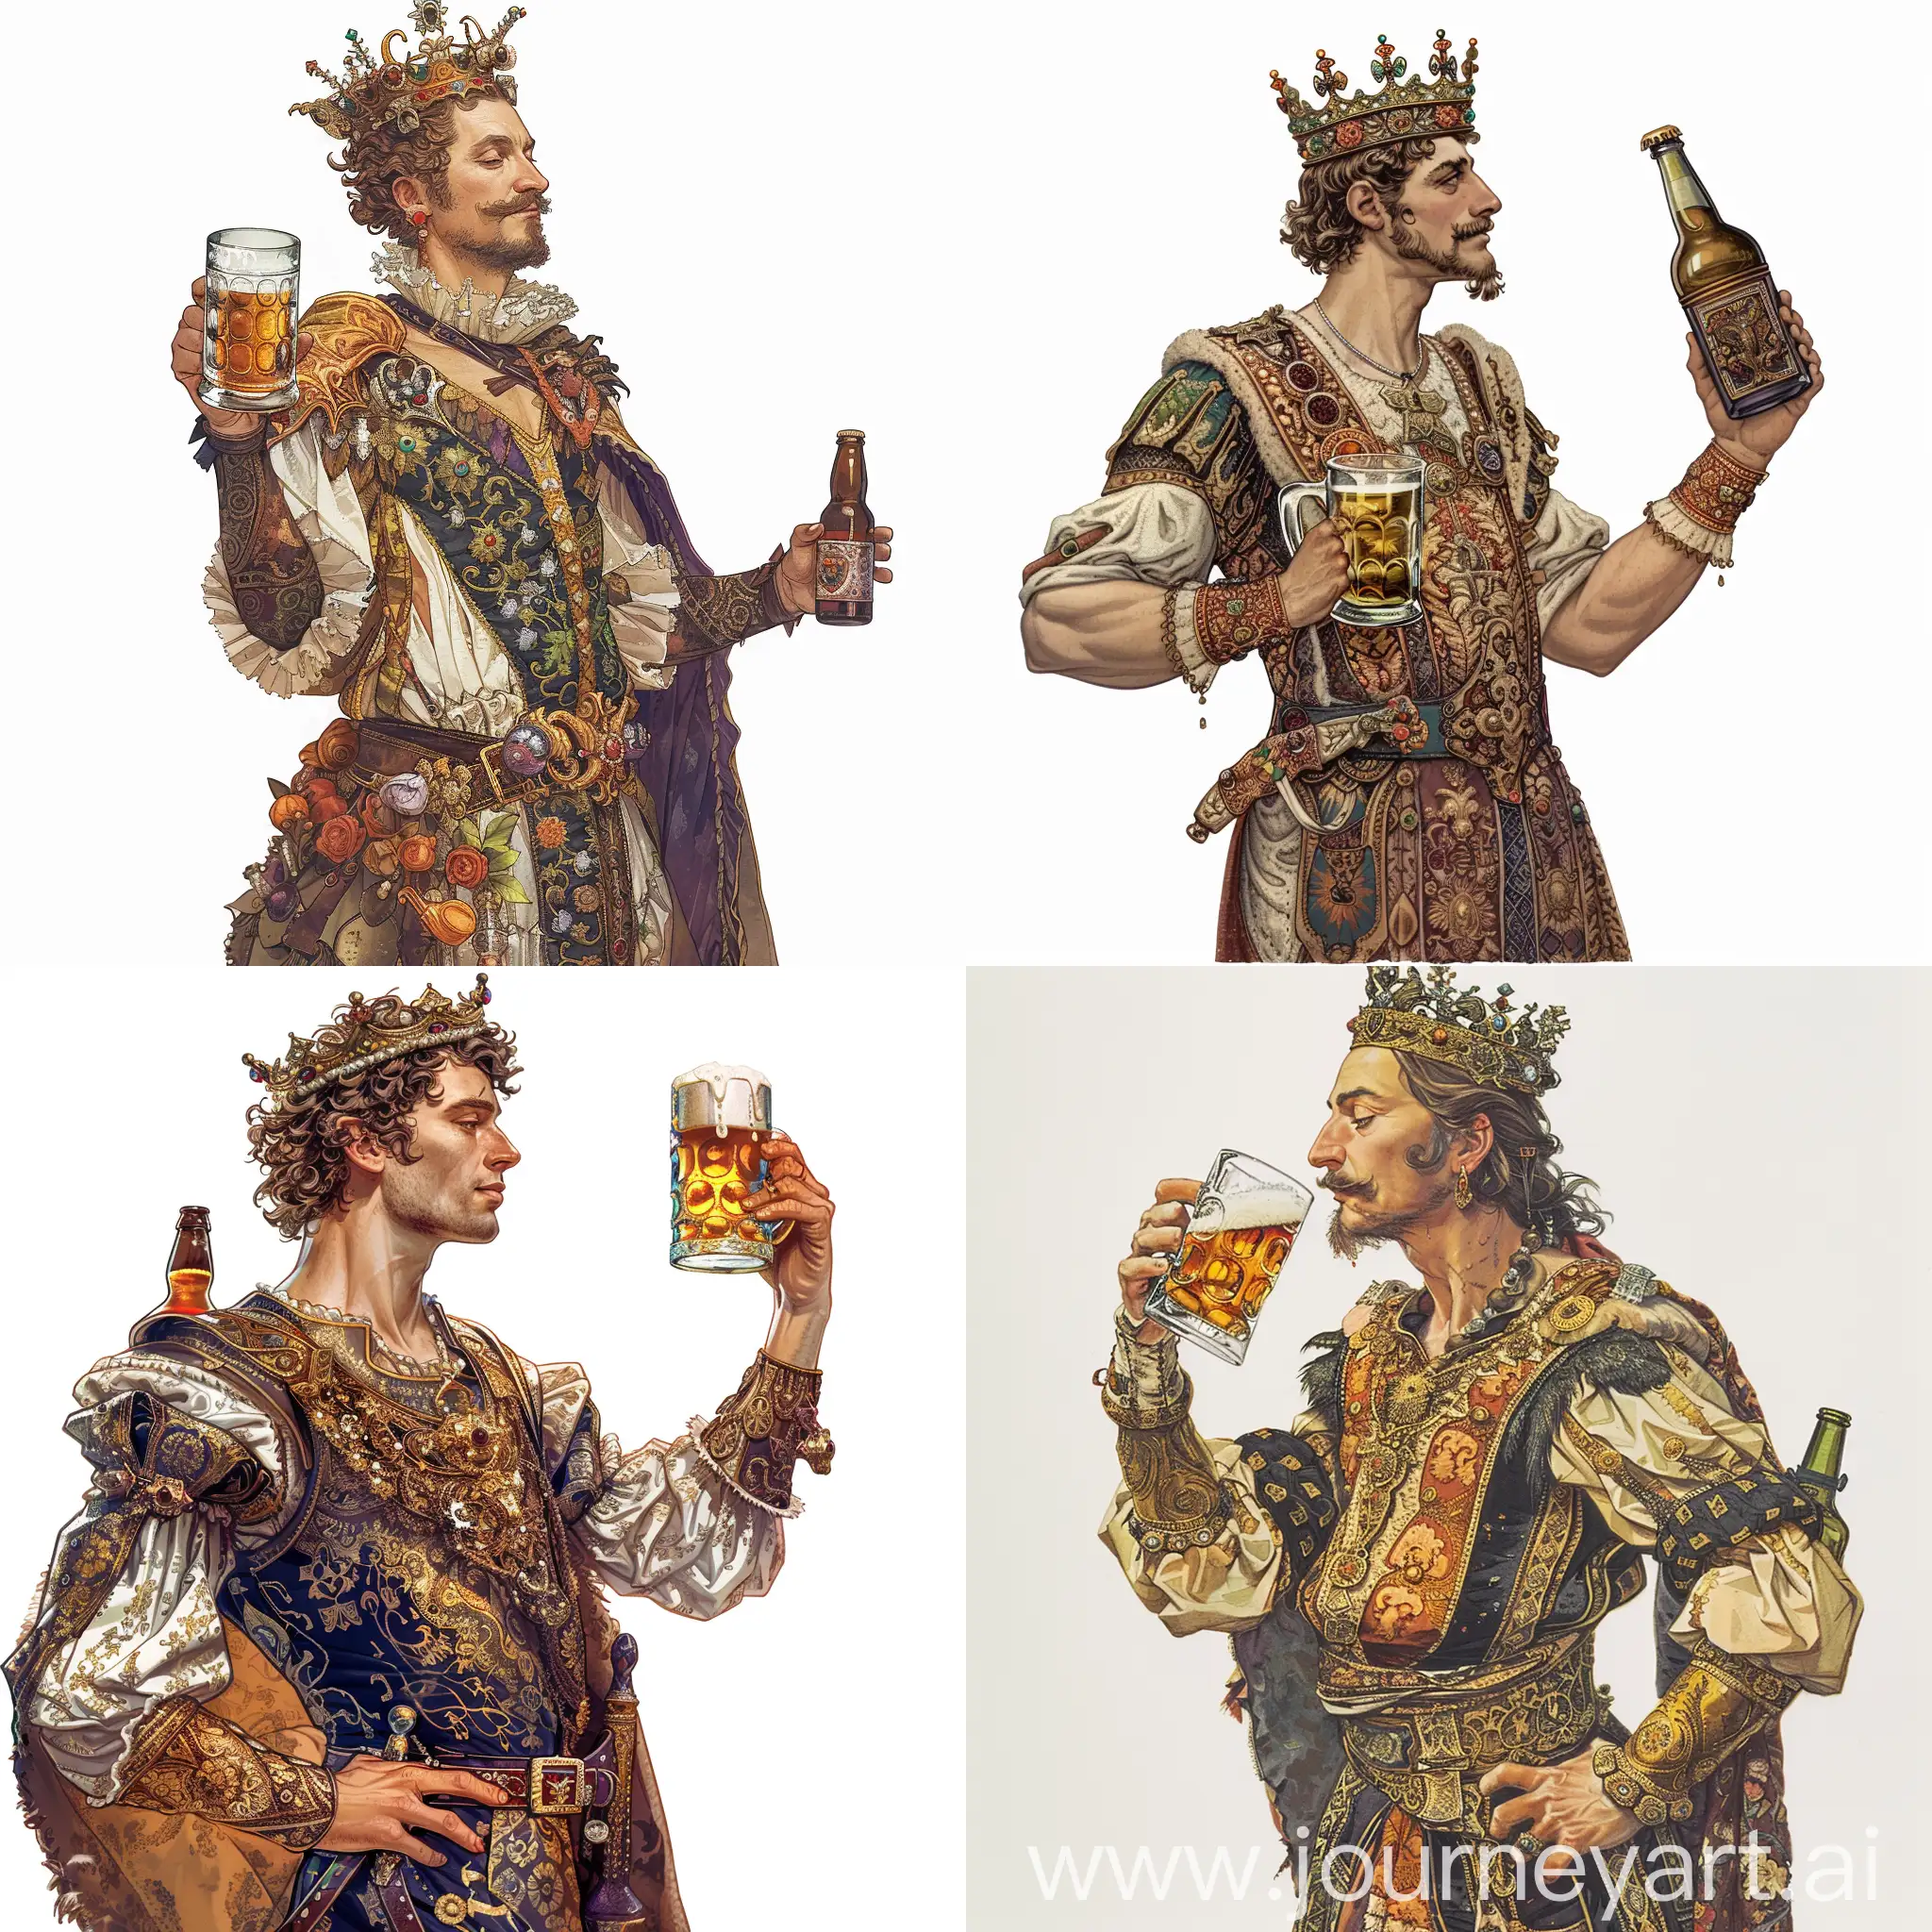 The king of ancient France in profile, portrait from the waist up, with a crown on his head, looking straight, in ancient ornate, exquisite clothes, holding a glass mug with beer at chin level, the other arm bent at the elbow and holding a bottle, complex colors, illustration, on a white background, Arthur Wrexham style